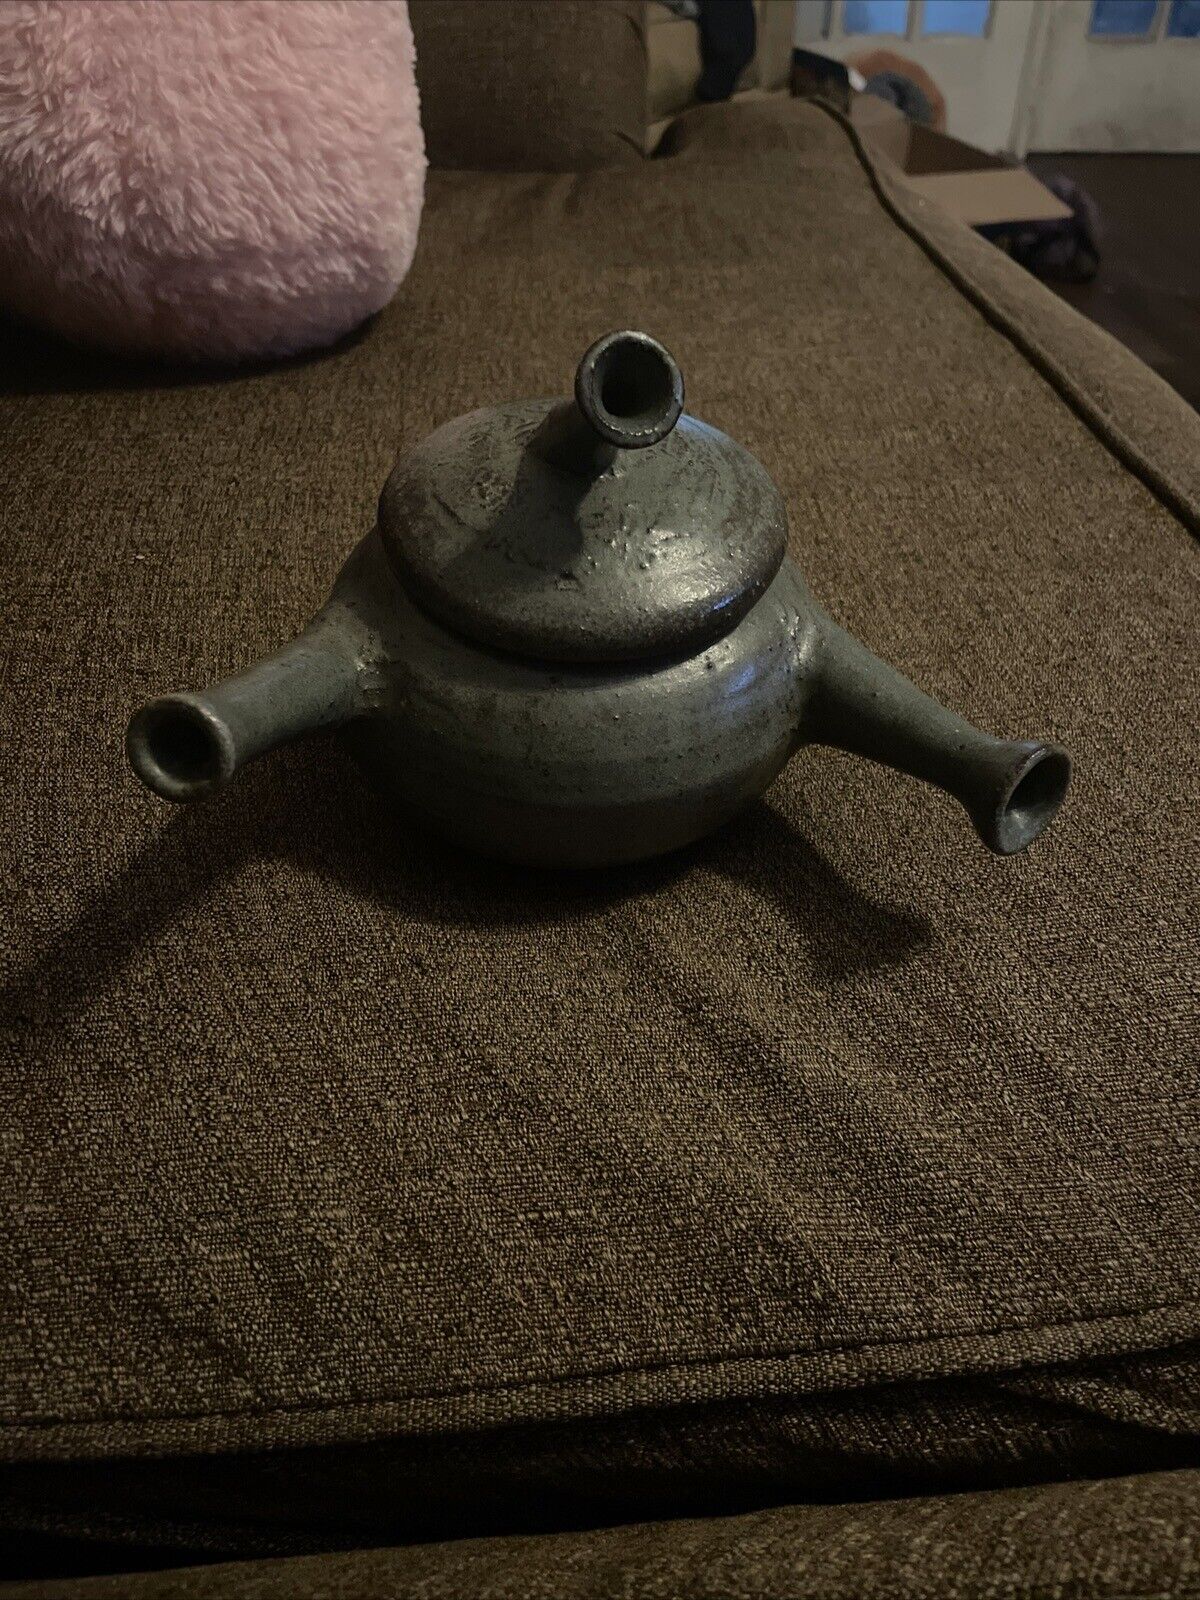 Handmade Teapot With a Alien Like Look to It.